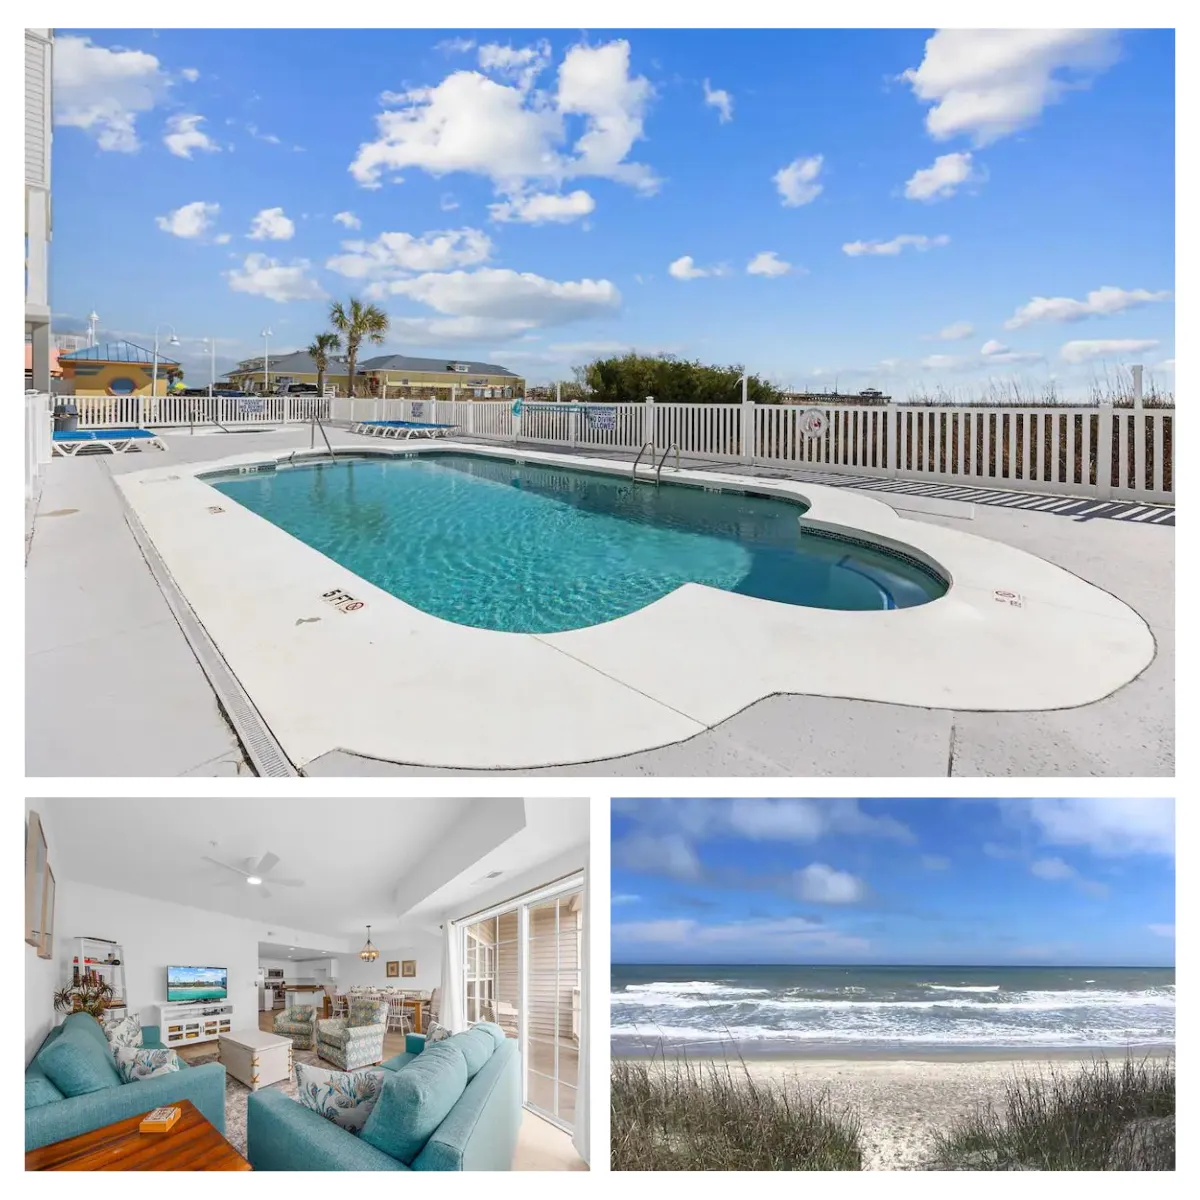 Experience the seaside charm at Cast-A-Waves: a recently updated 6-bed, 4-bath beach condo in Cherry Grove, SC, perfect for groups, families, and friends, with beach access and intercoastal vistas.